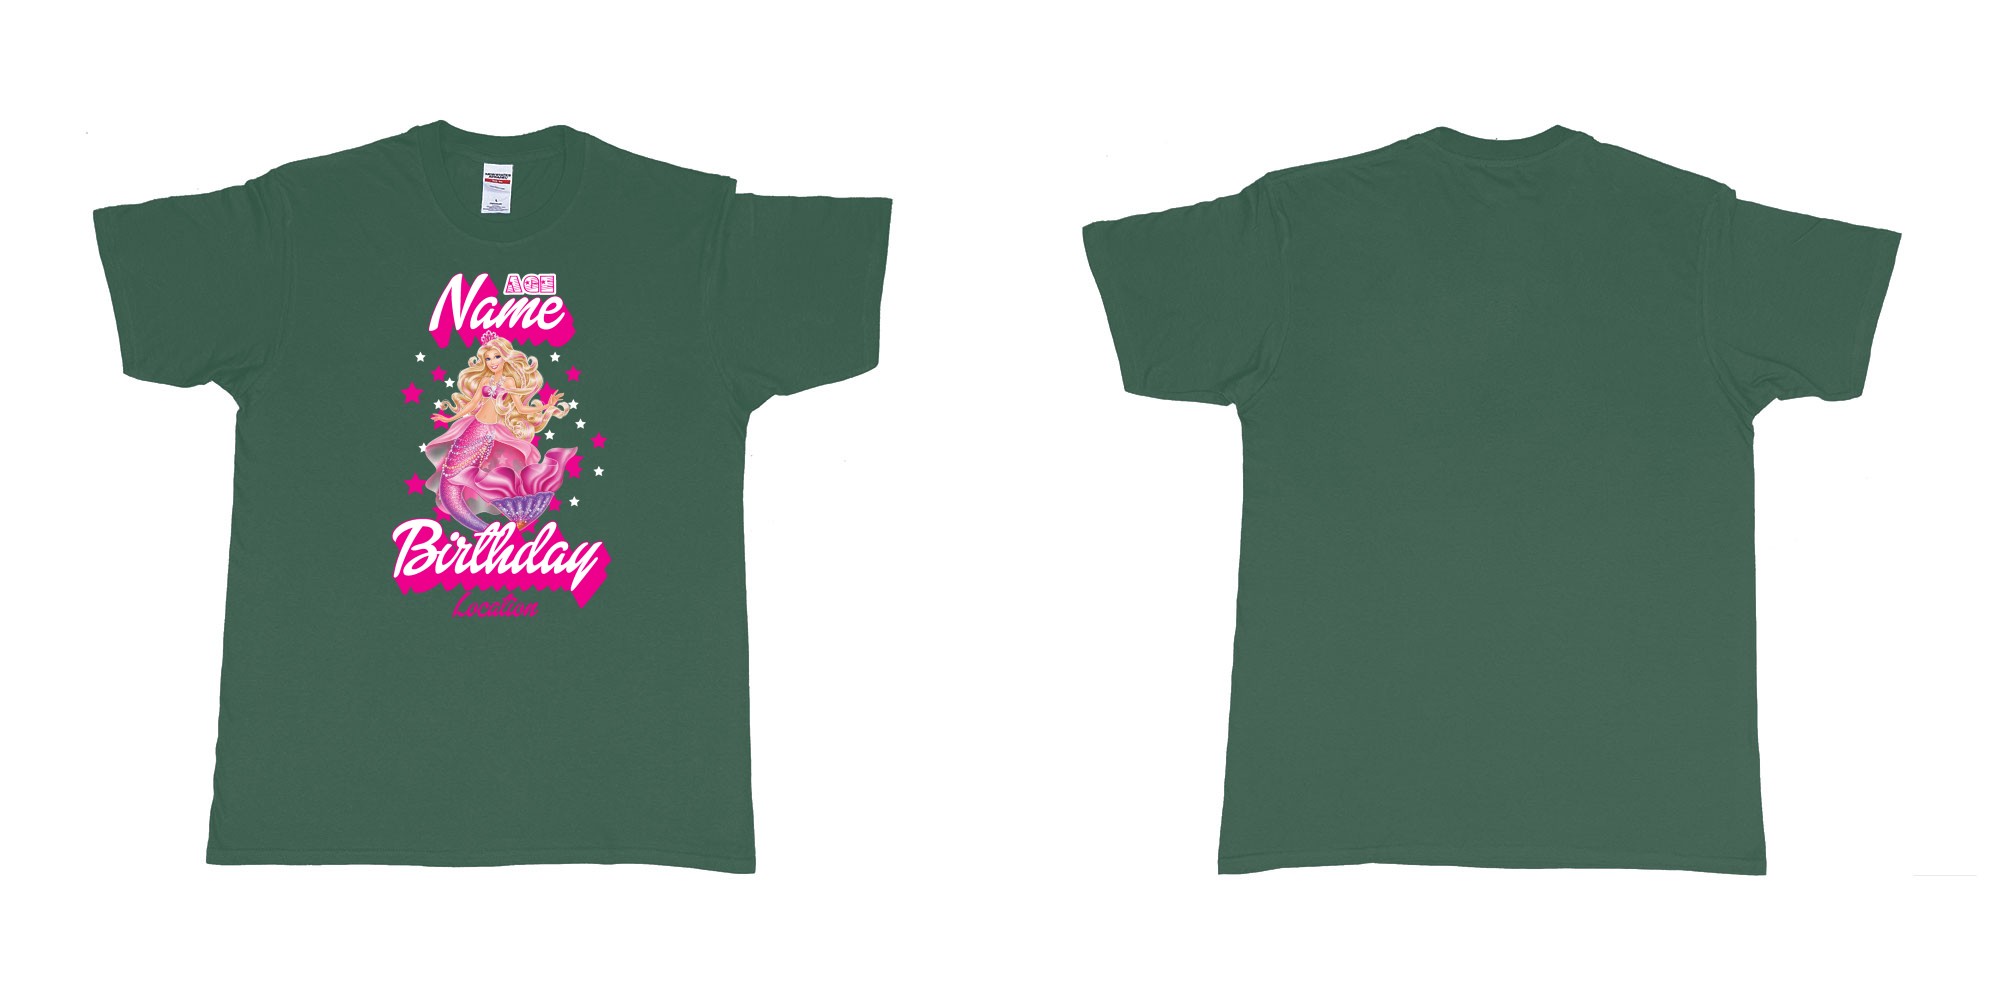 Custom tshirt design barbie mermaid custom name birthday in fabric color forest-green choice your own text made in Bali by The Pirate Way